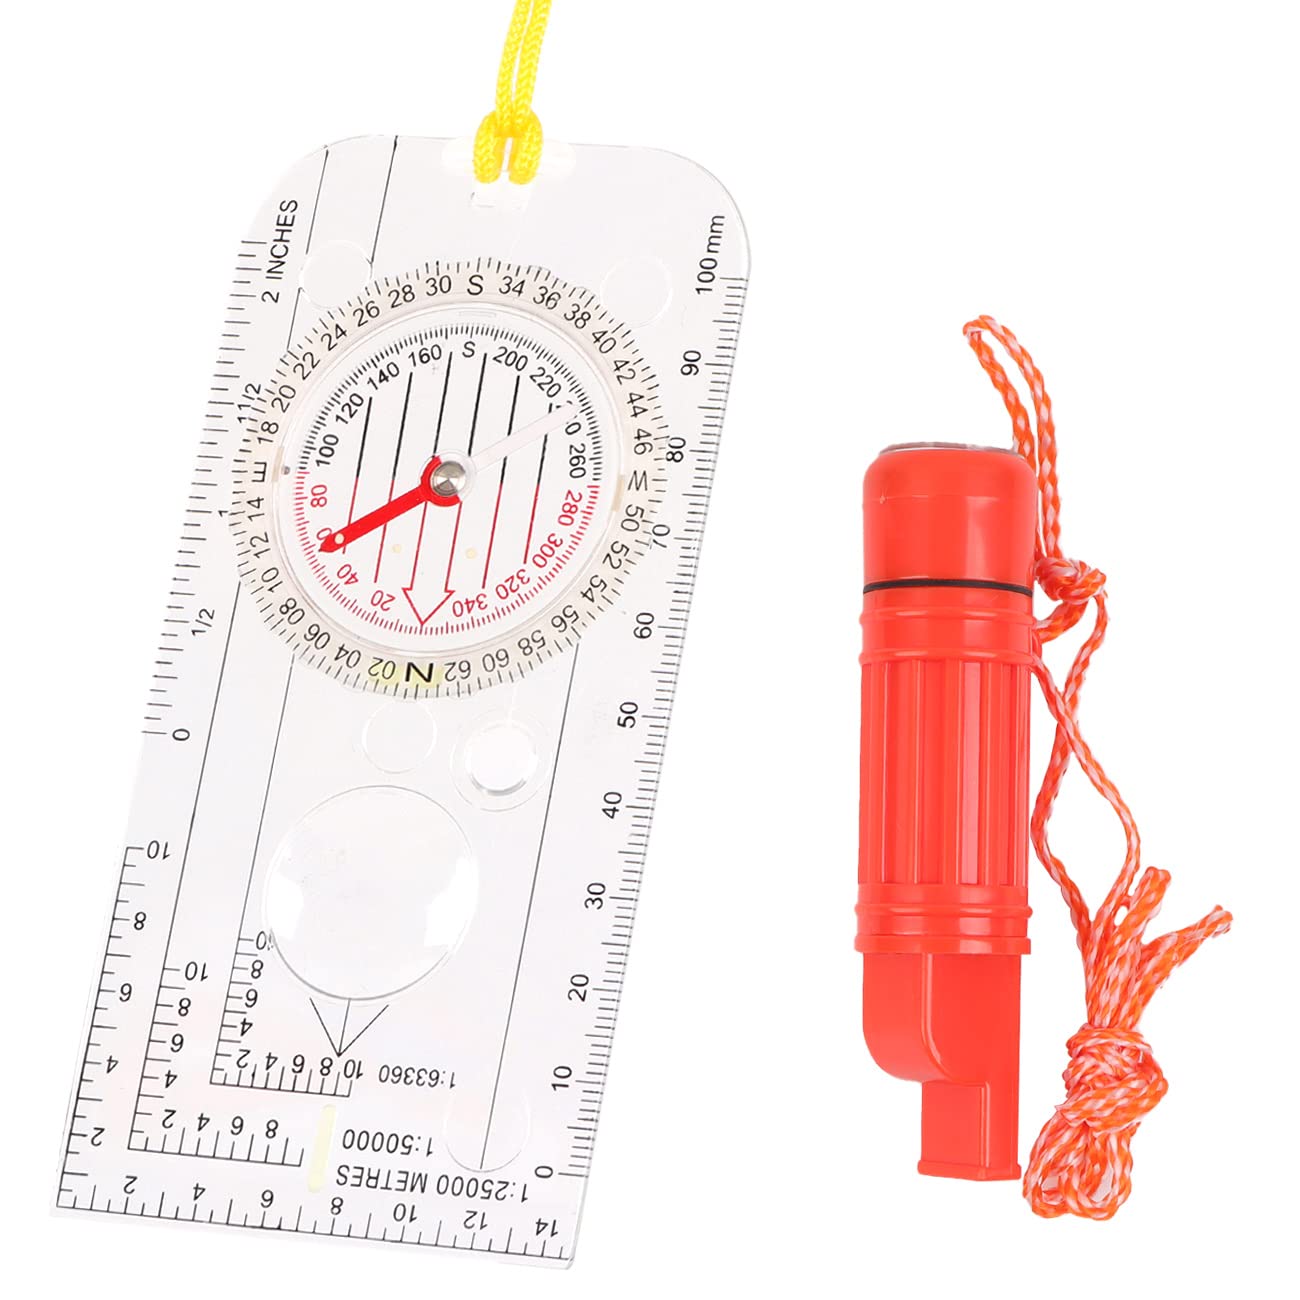 "N/A" Navigation Compass, Orienteering Compass,Explorer Compass for Map Reading and Navigation, Adjustable Declination,with Lanyard and Emergency Whistle,for Camping,Survival Mountaineering,Hiking